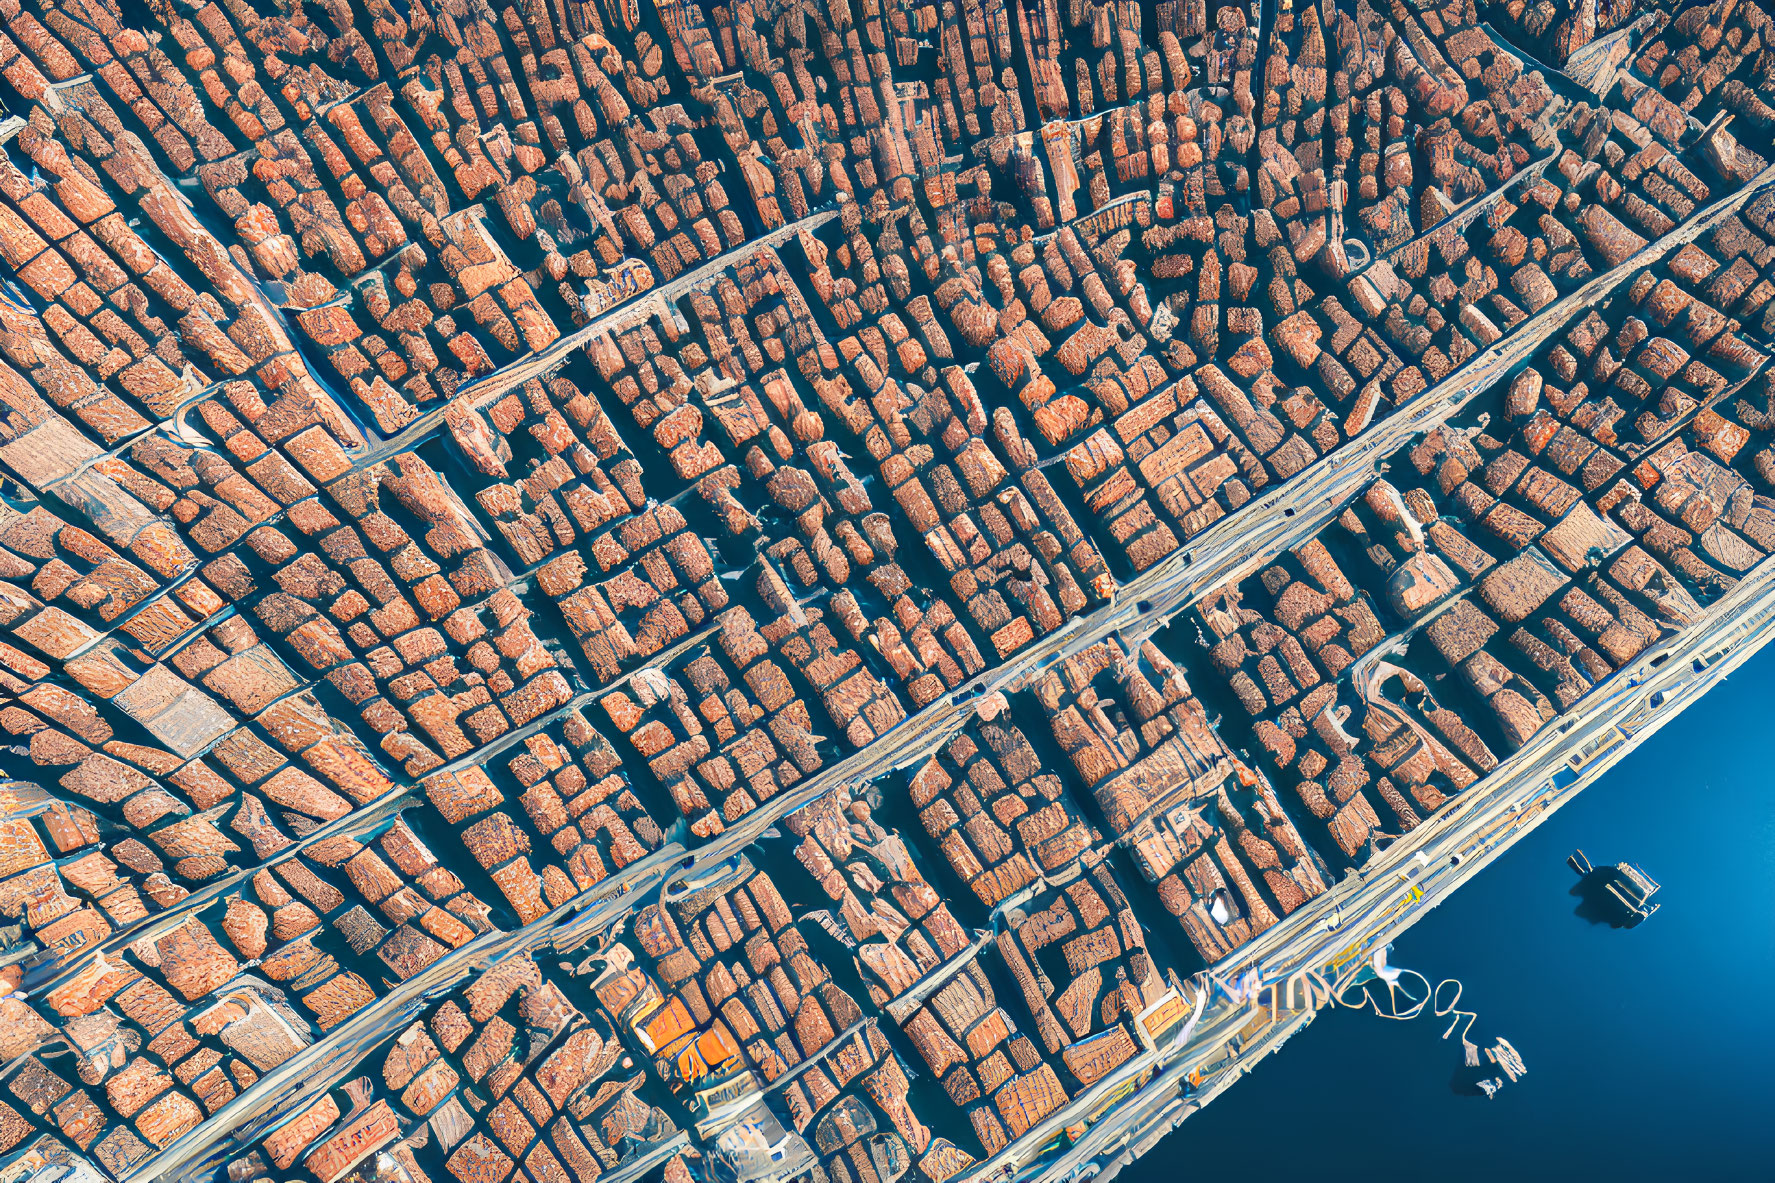 Dense Grid-Patterned Cityscape with Orange Rooftops by Waterway